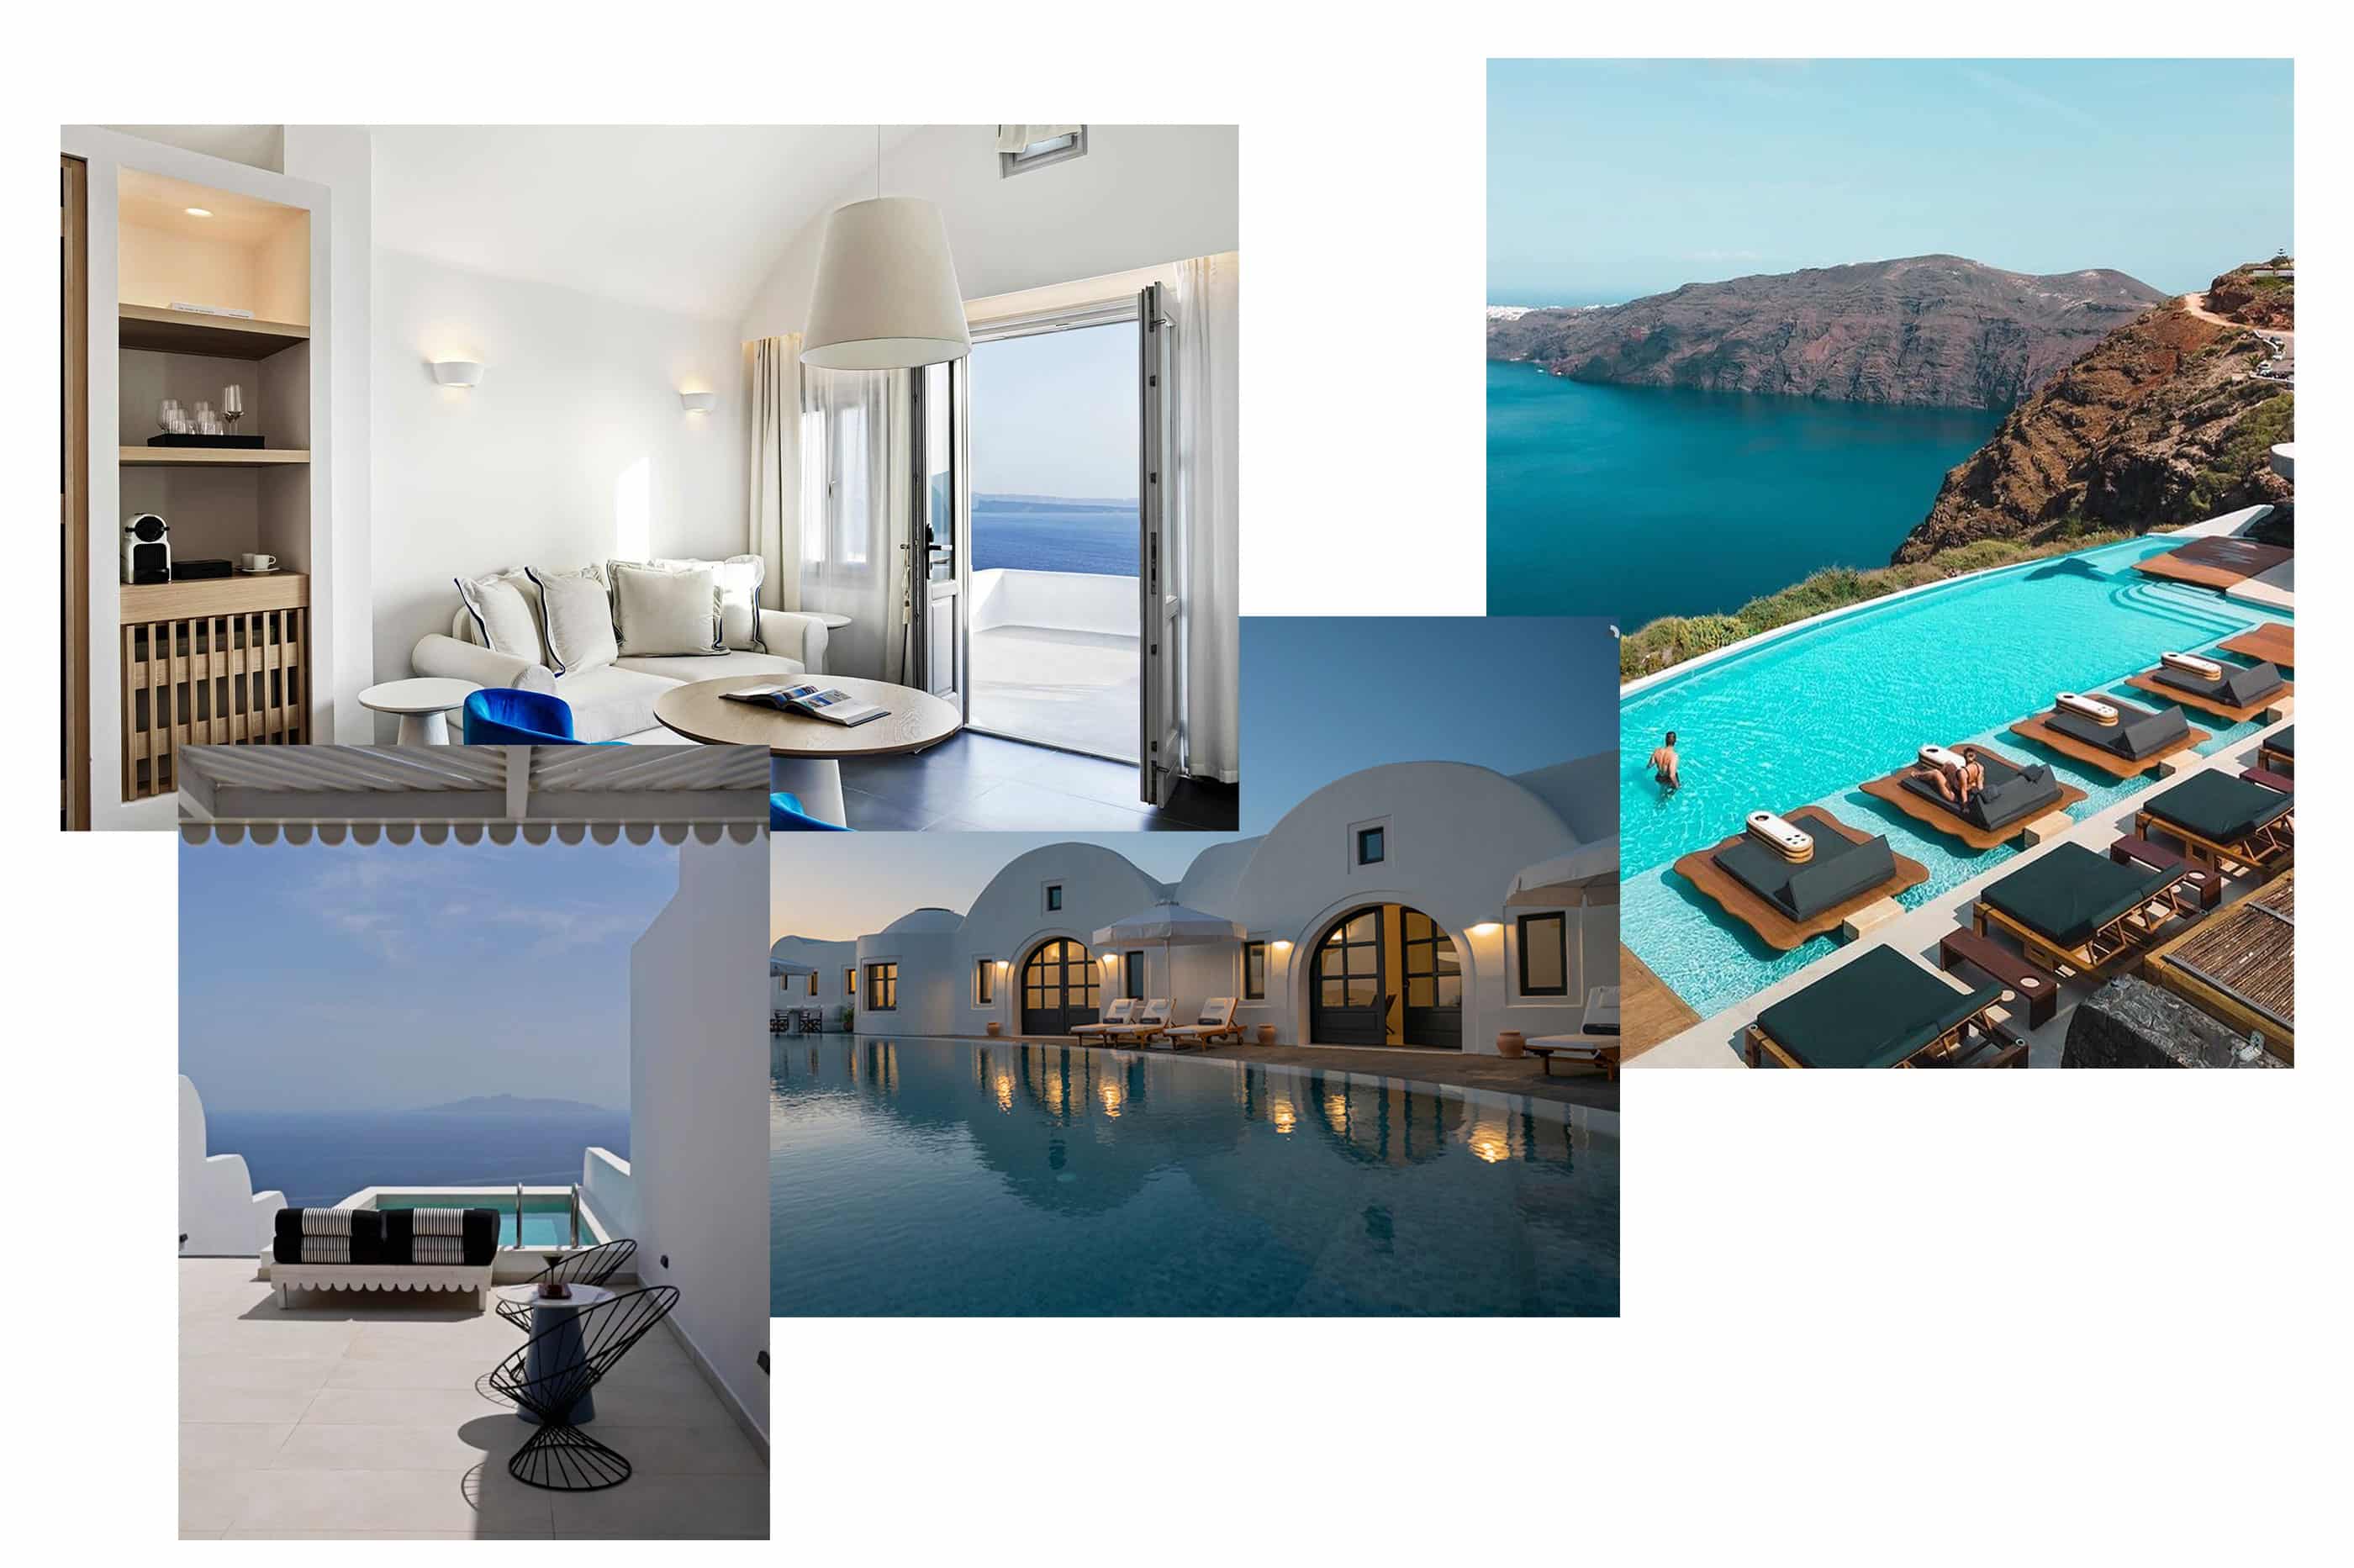 12 of the best hotels to stay in when visiting Santorini, Greece